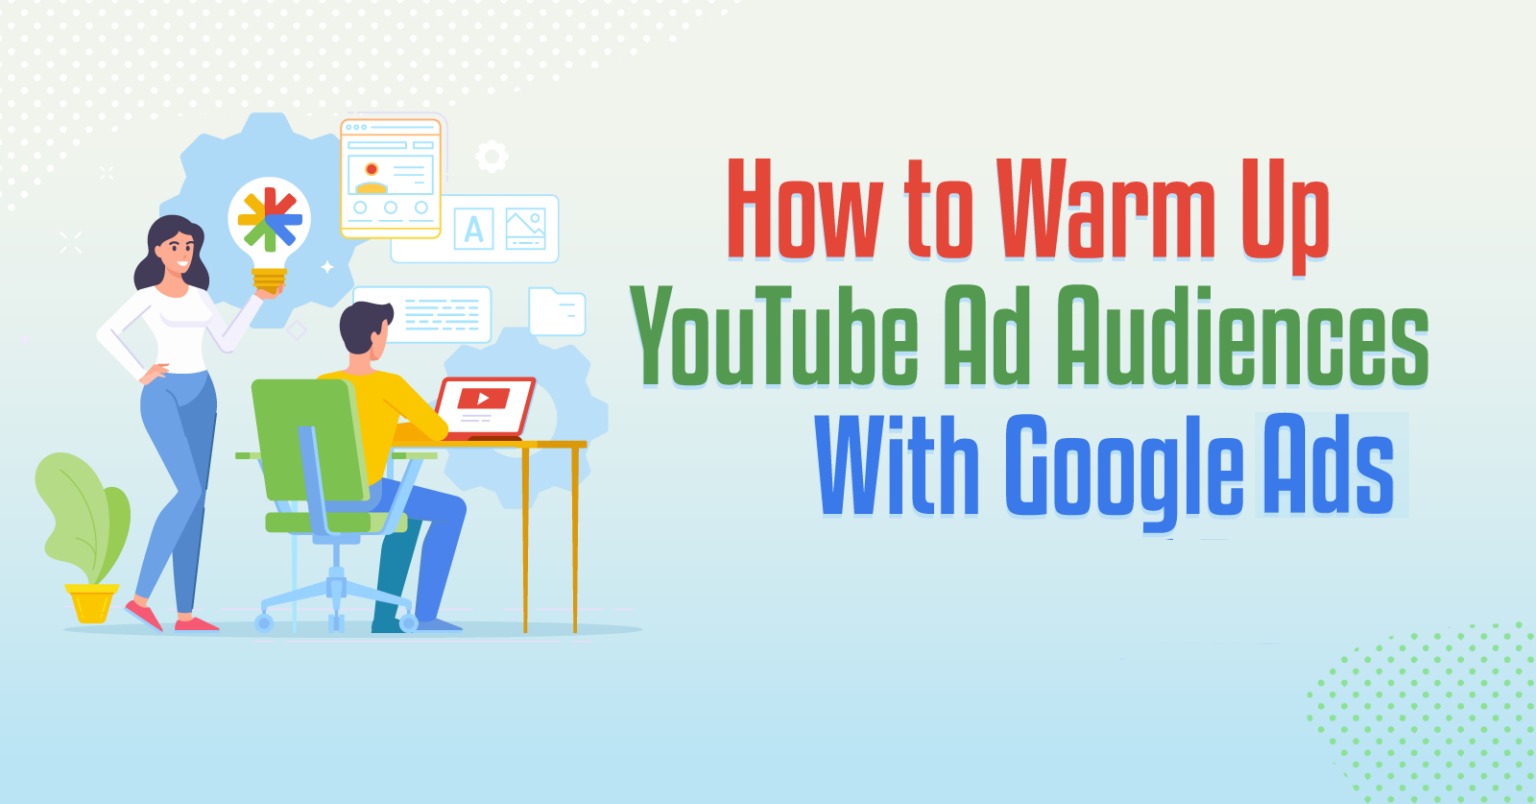 You are currently viewing How to Warm Up YouTube Ads Audiences with Google Ads